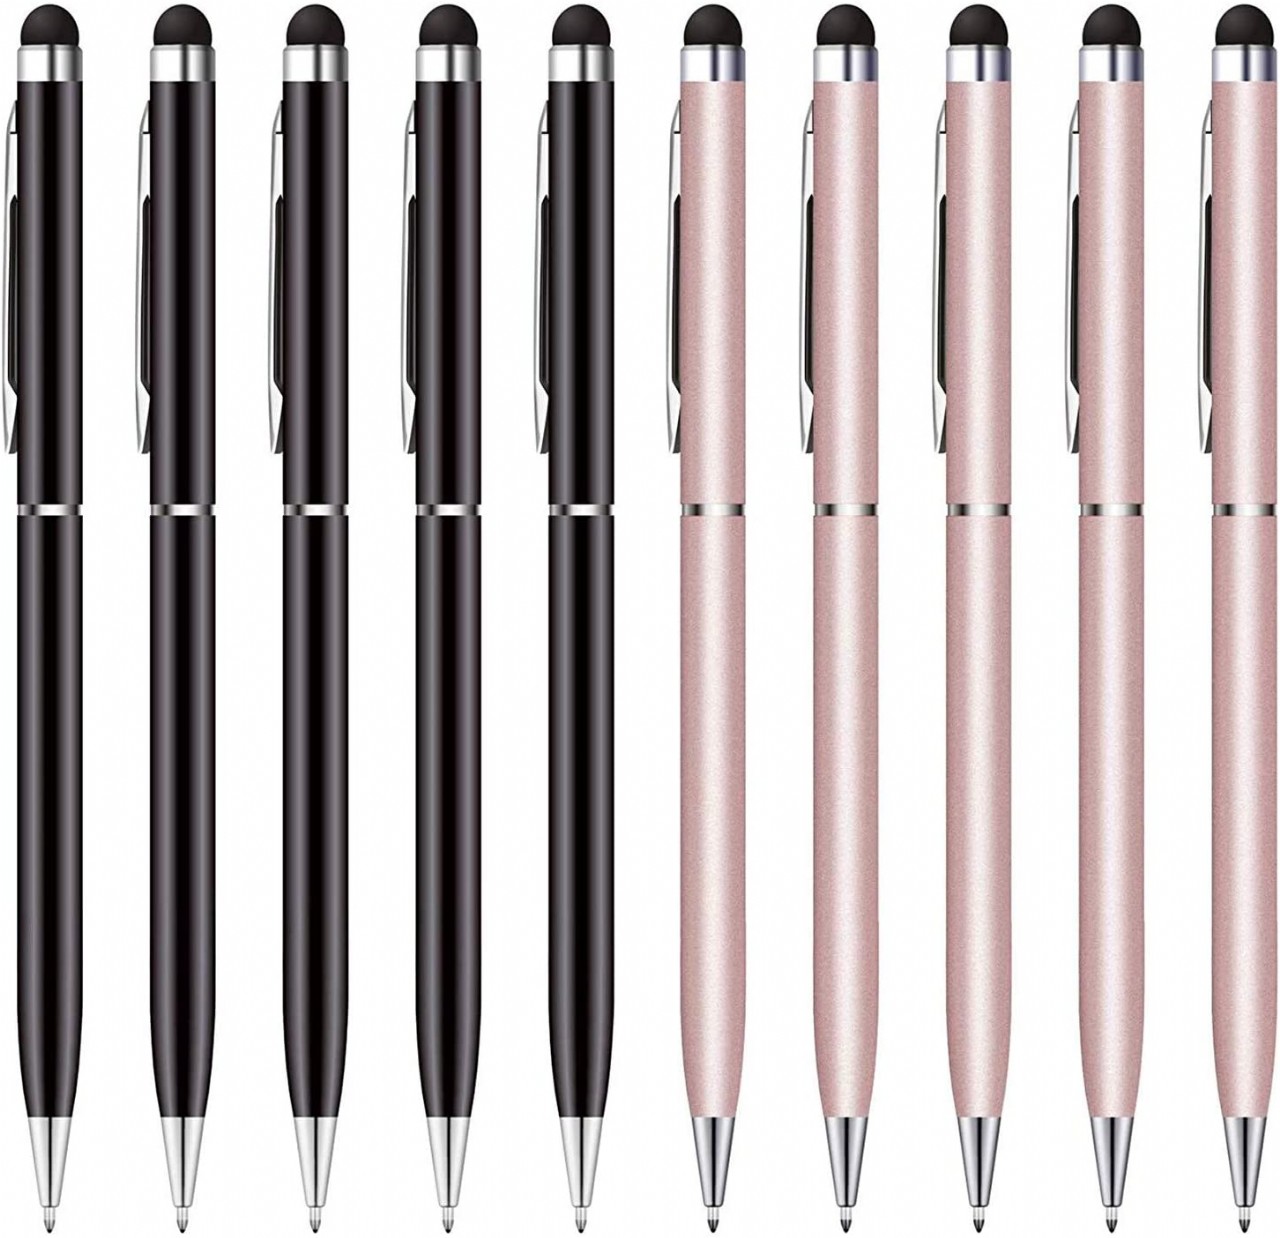 Stylus Pens for Touch Screens Devices Universal Capacitive Stylus Ballpoint Pen for iPad Cell Phones